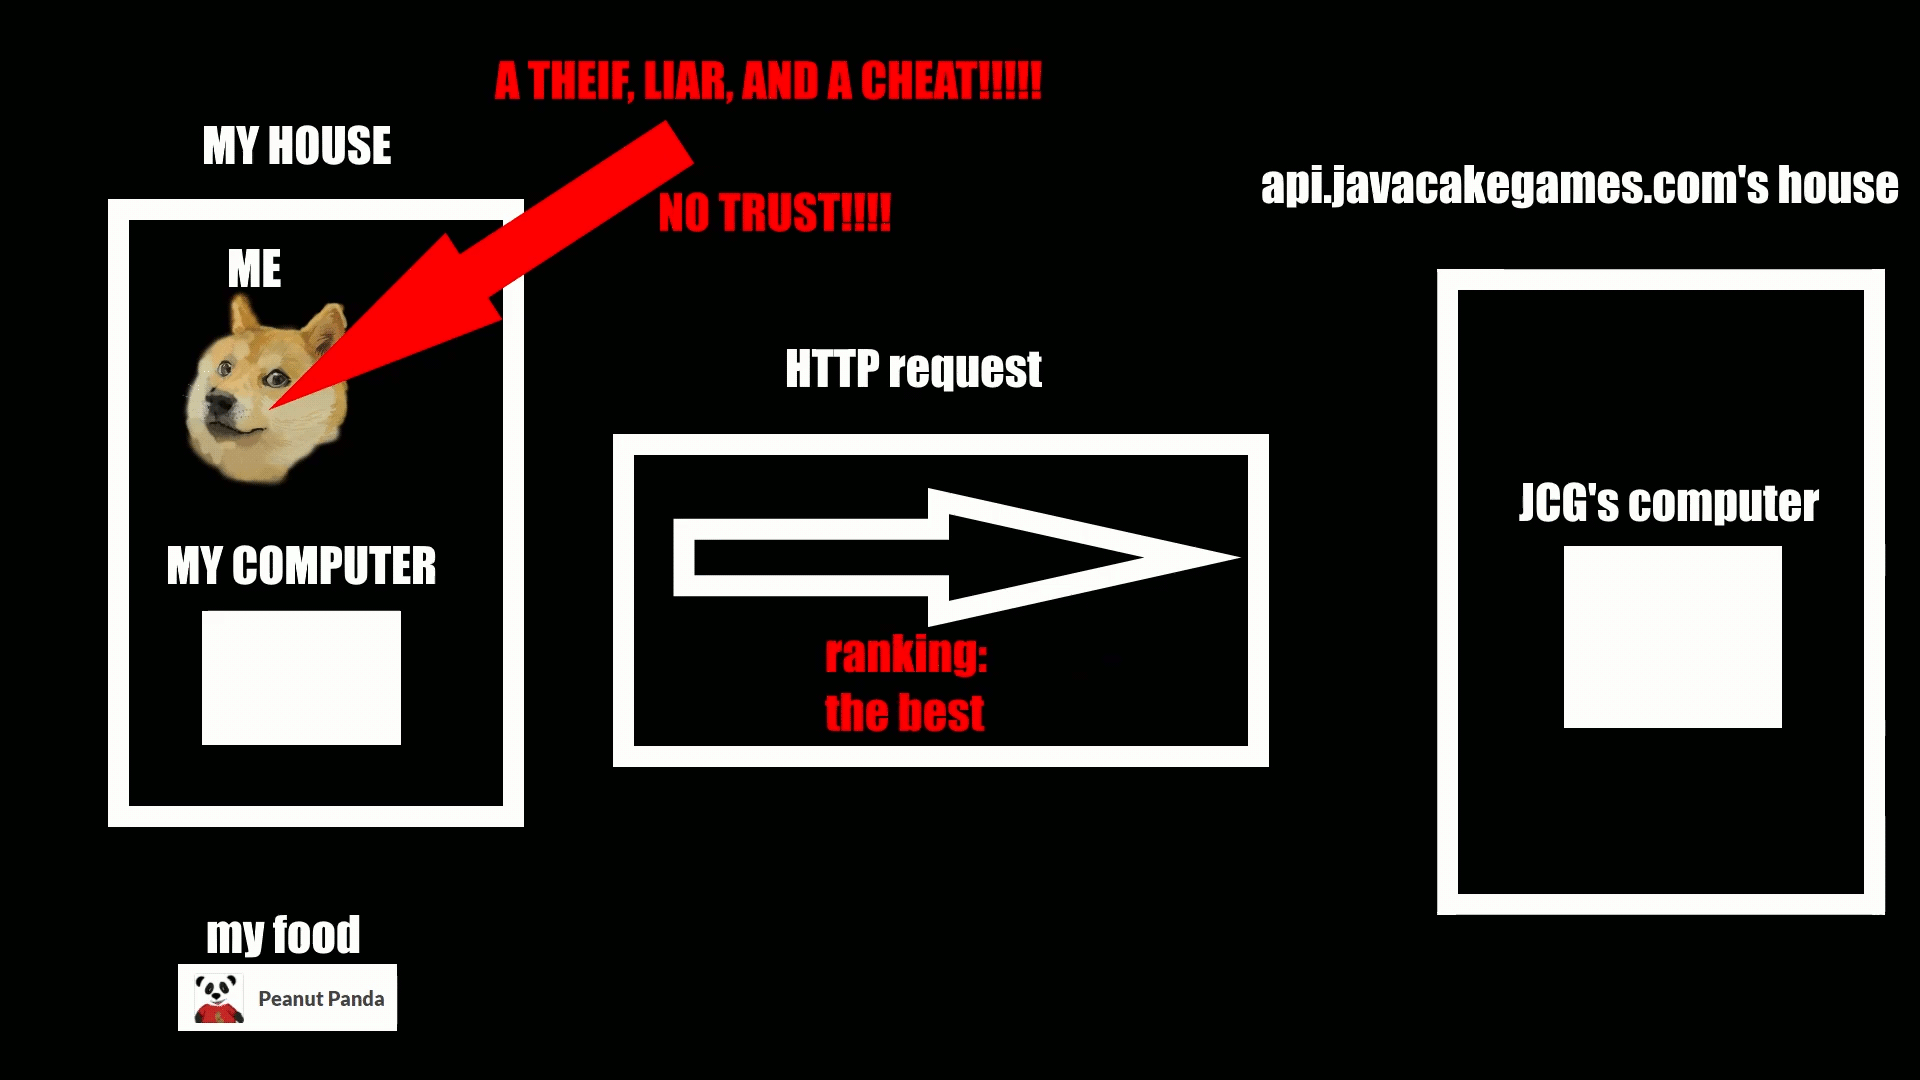 A diagram showing Developer Doge fooling my computer into believing he is ranked the best.